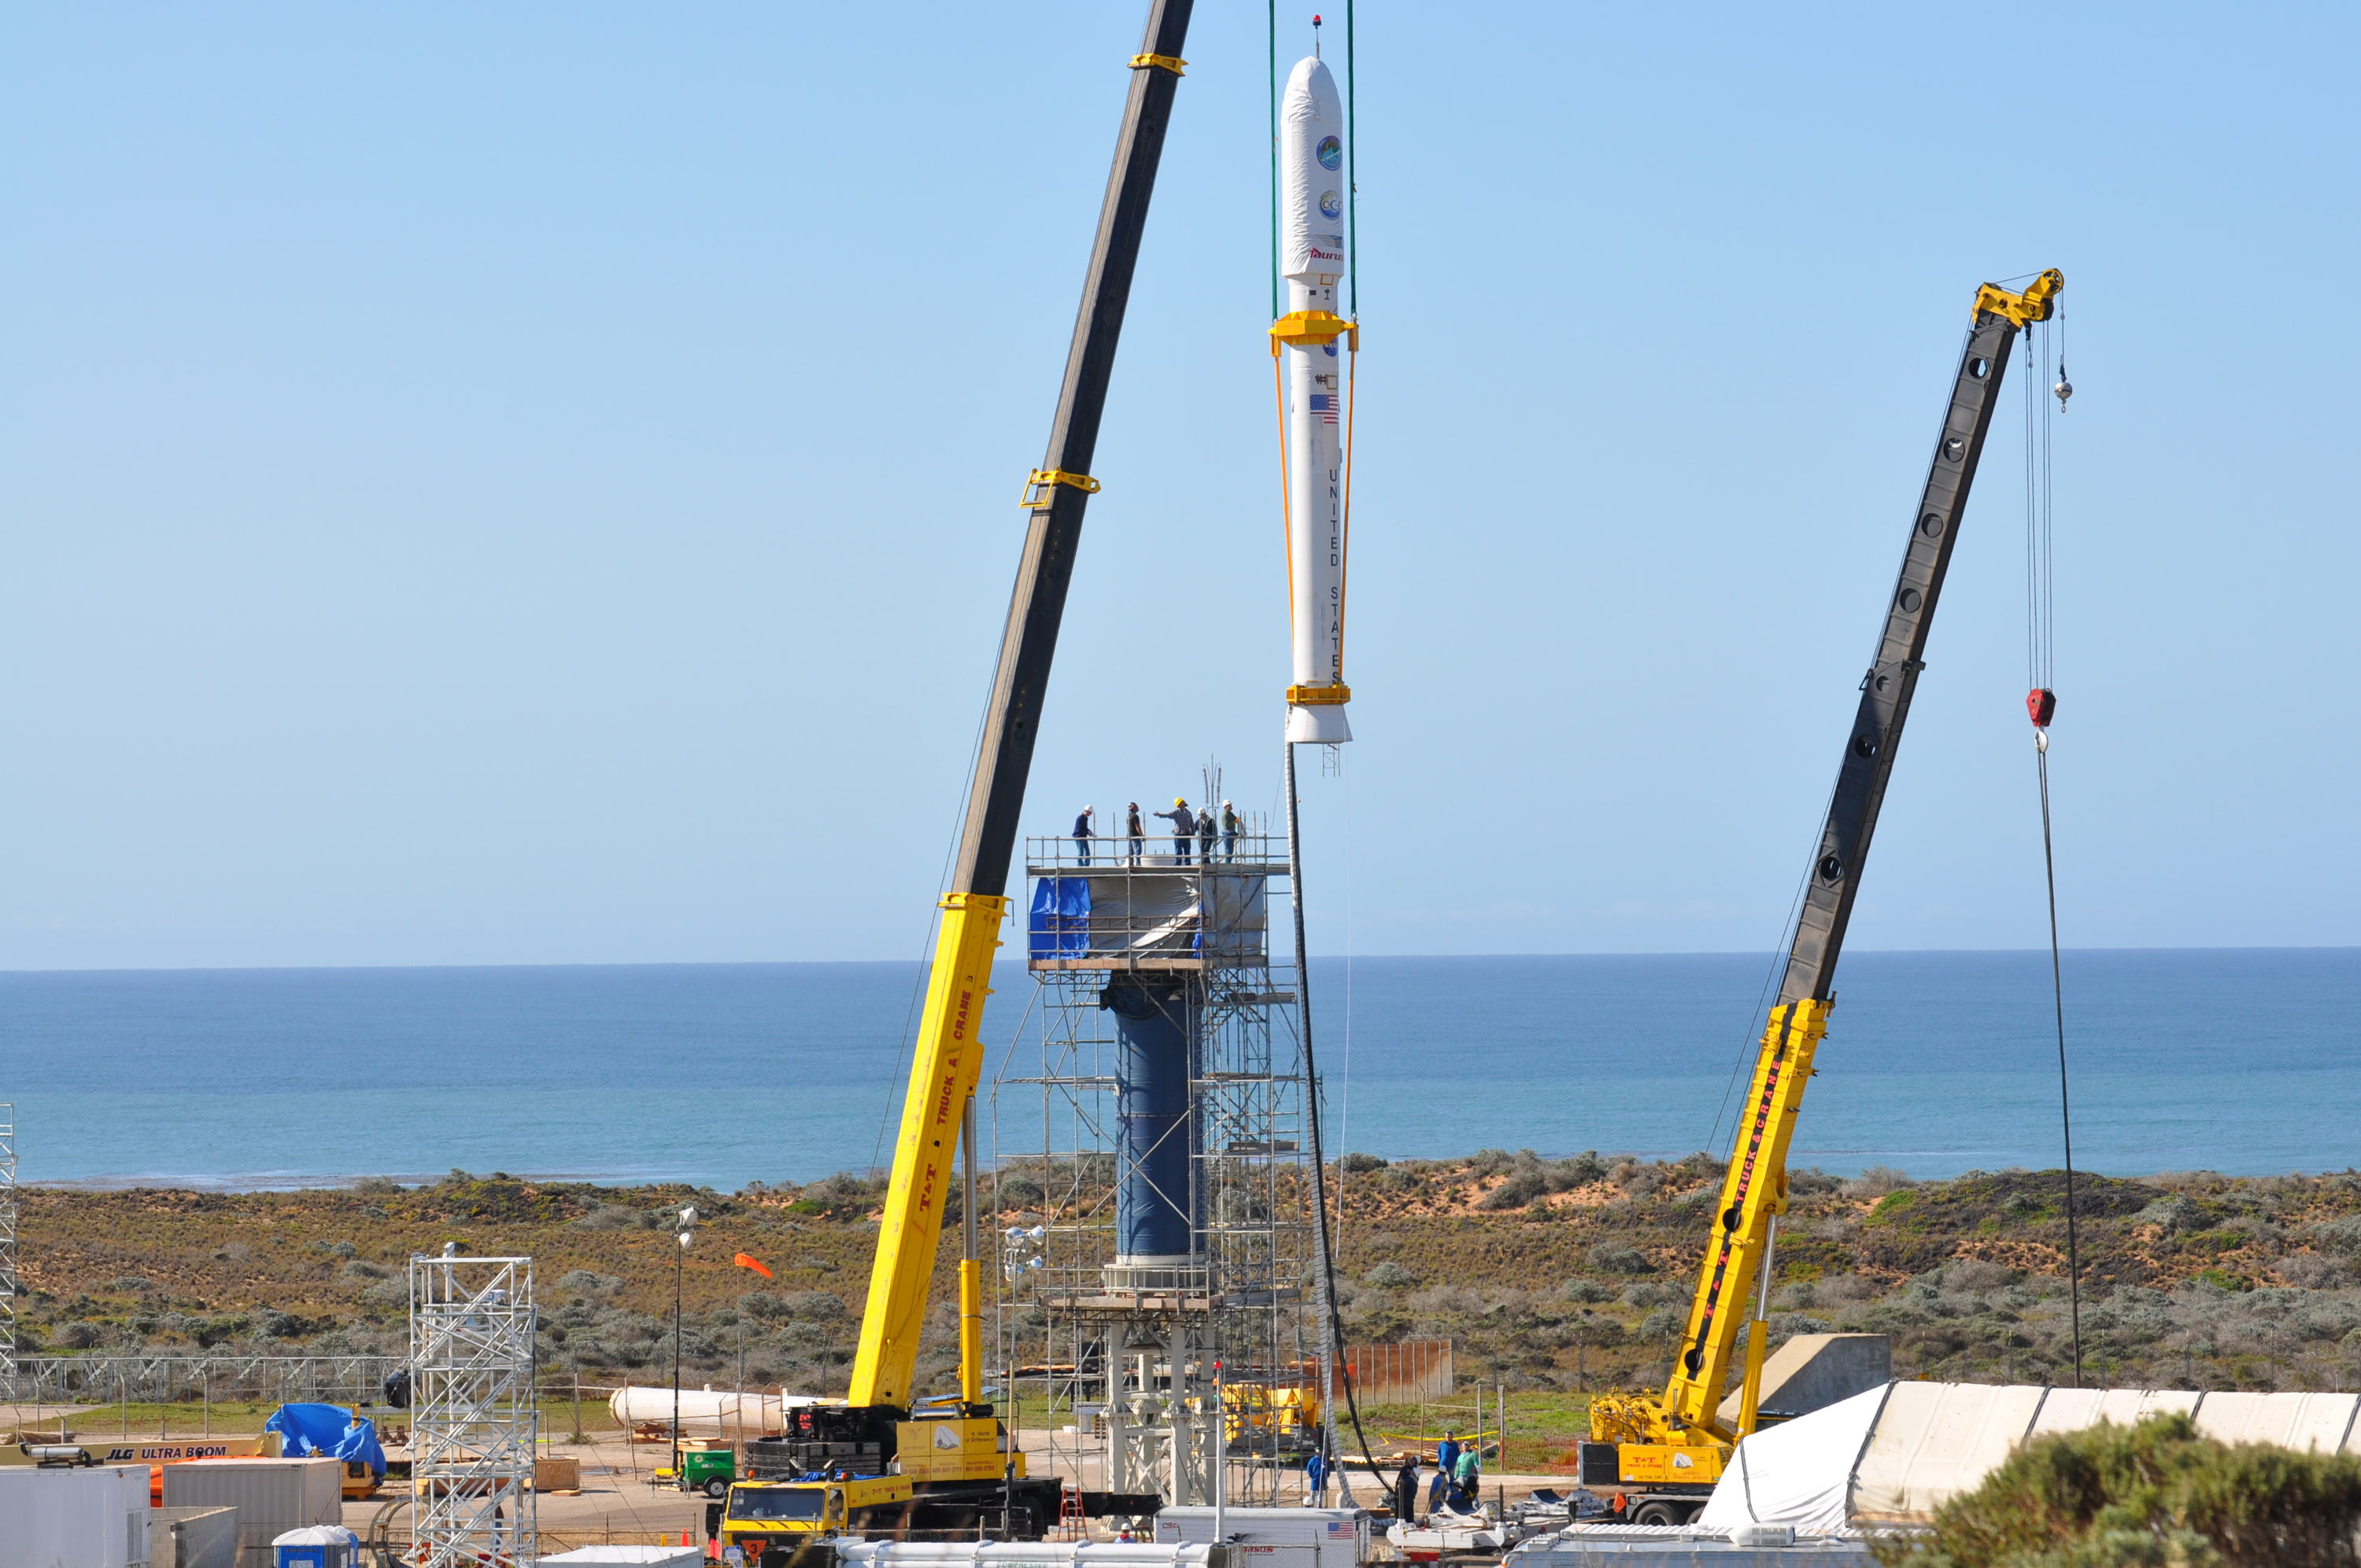 Taurus XL upper Stages lifted on the Stage 0